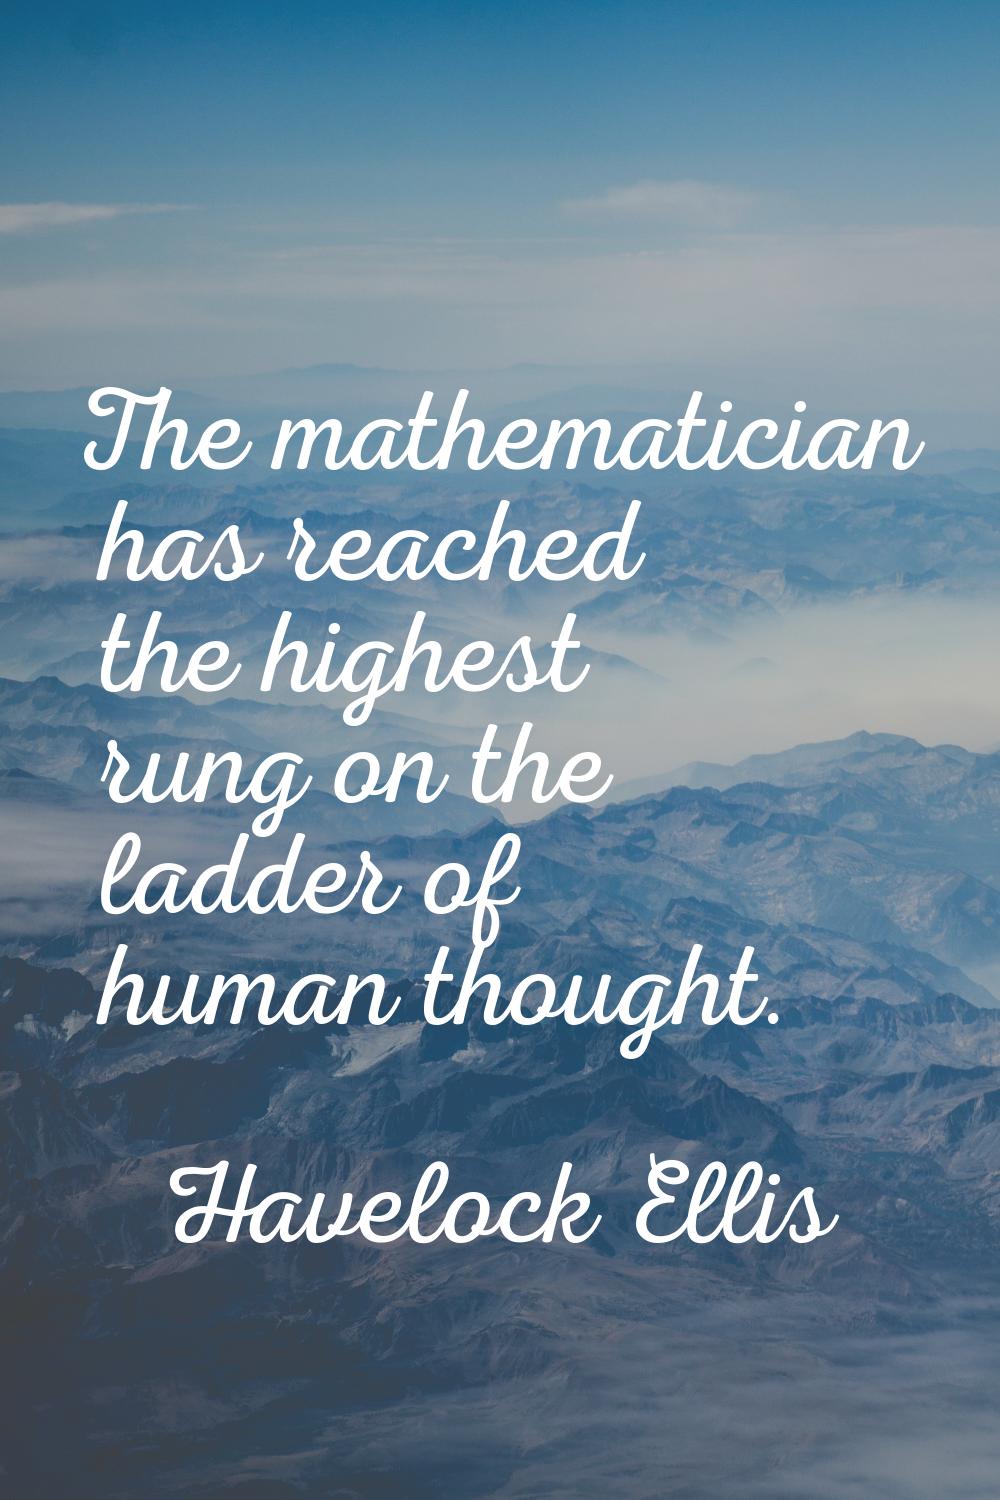 The mathematician has reached the highest rung on the ladder of human thought.